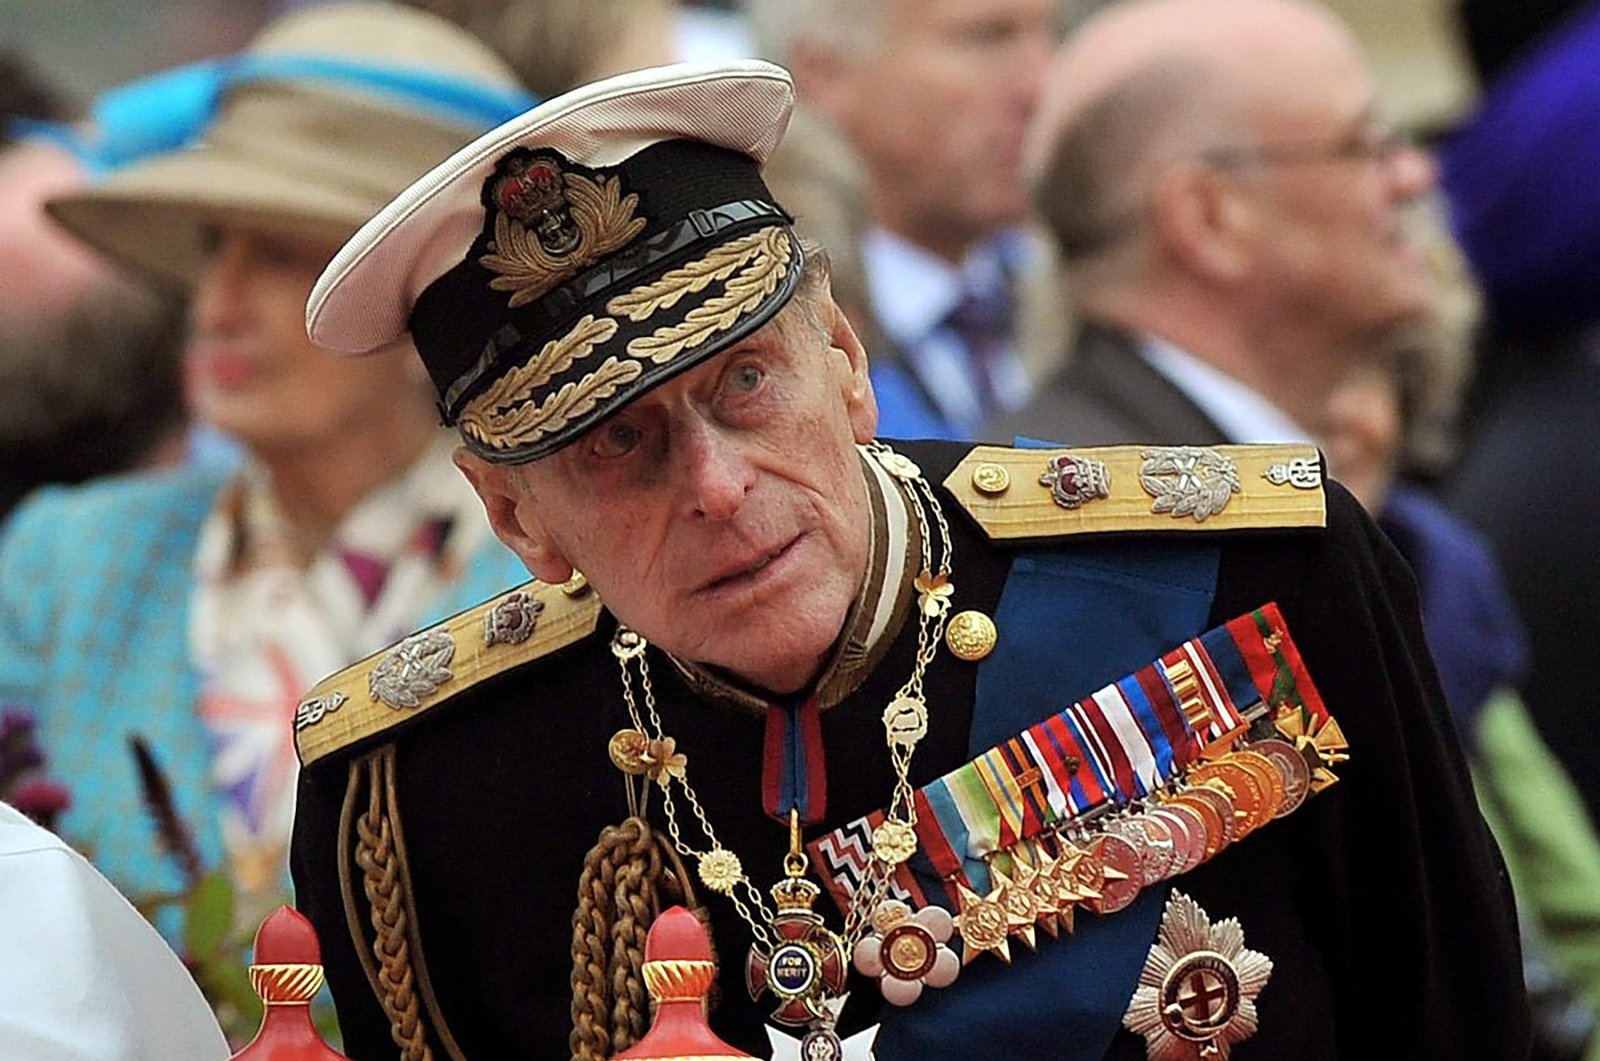 Prince Philip watches the proceedings from the royal barge during the Diamond Jubilee Pageant on the River Thames in London, June 3, 2012. (AP Photo)